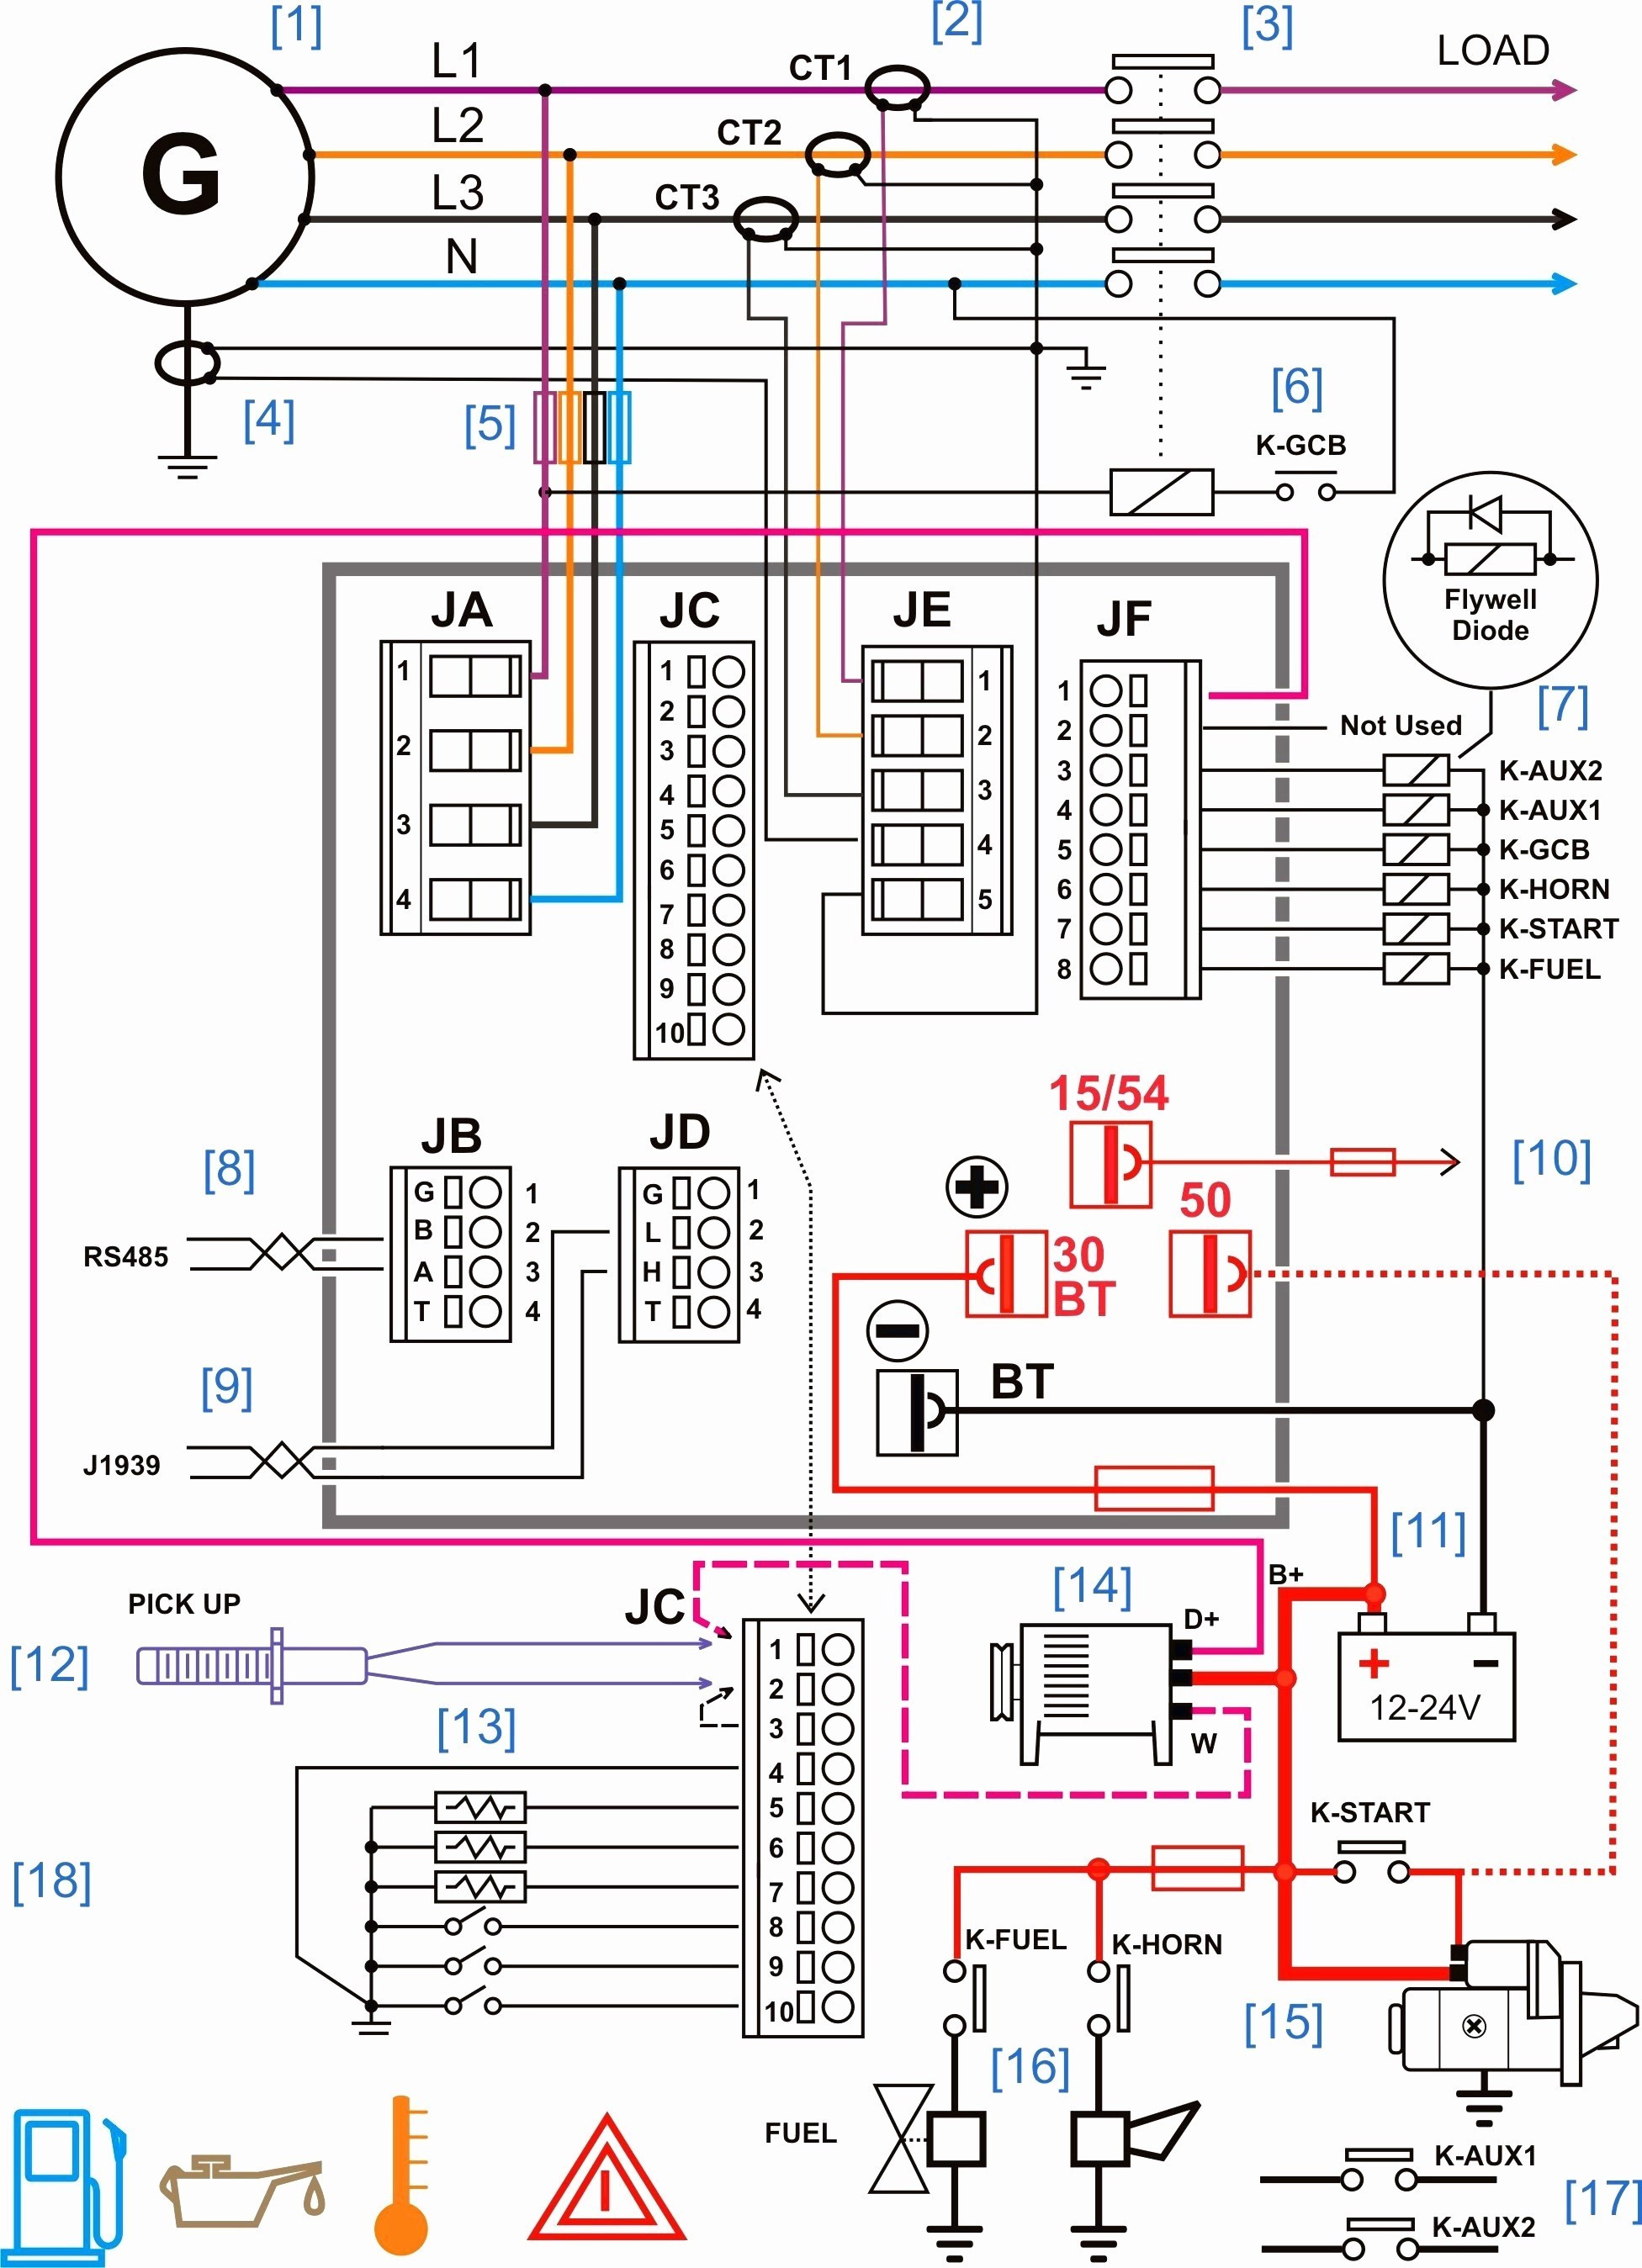 Wiring Diagram For Razor E100 Electric Scooter